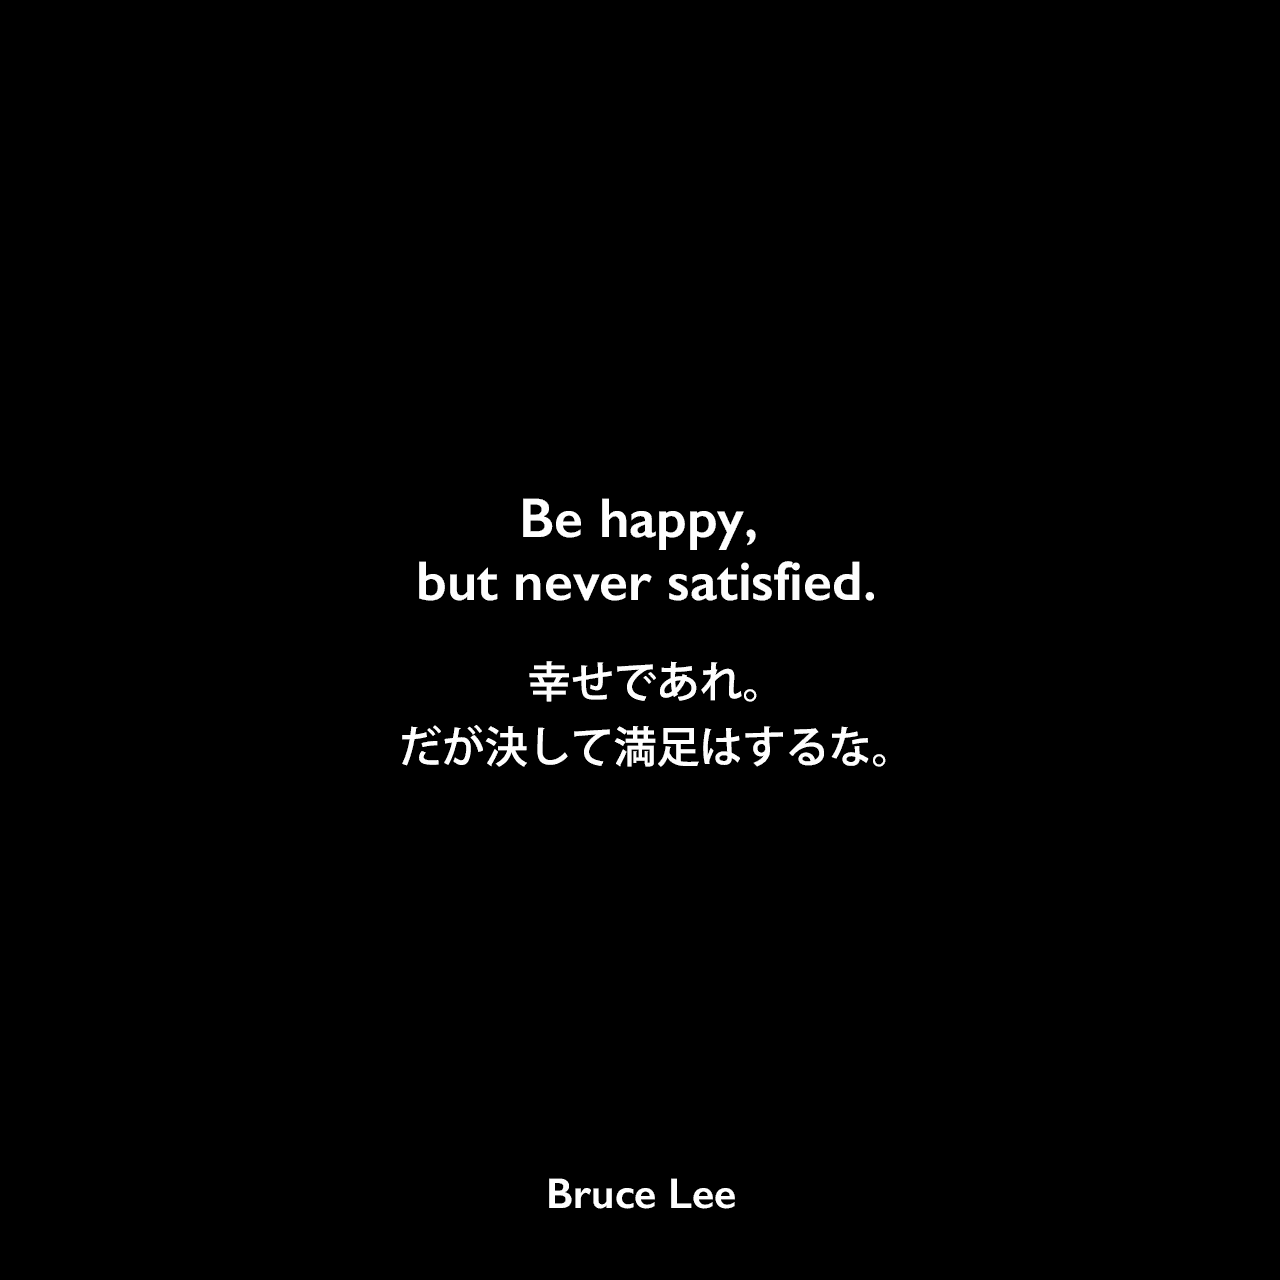 Be happy, but never satisfied.幸せであれ。だが決して満足はするな。